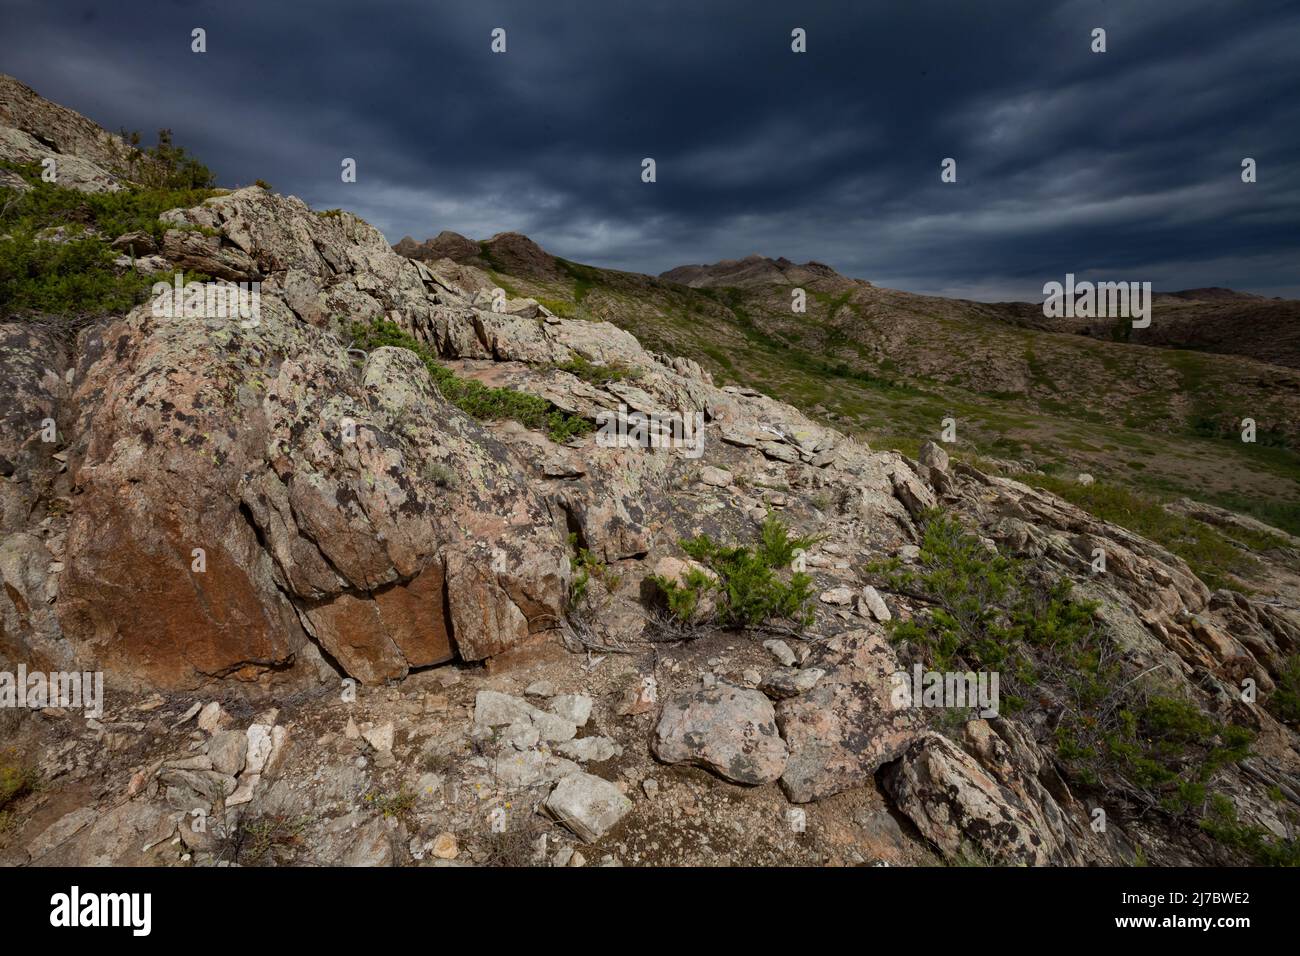 Wide-angle view on mountains and dark gray pre-storm sky. Ulytau, Kazakhstan. Aerial view Stock Photo